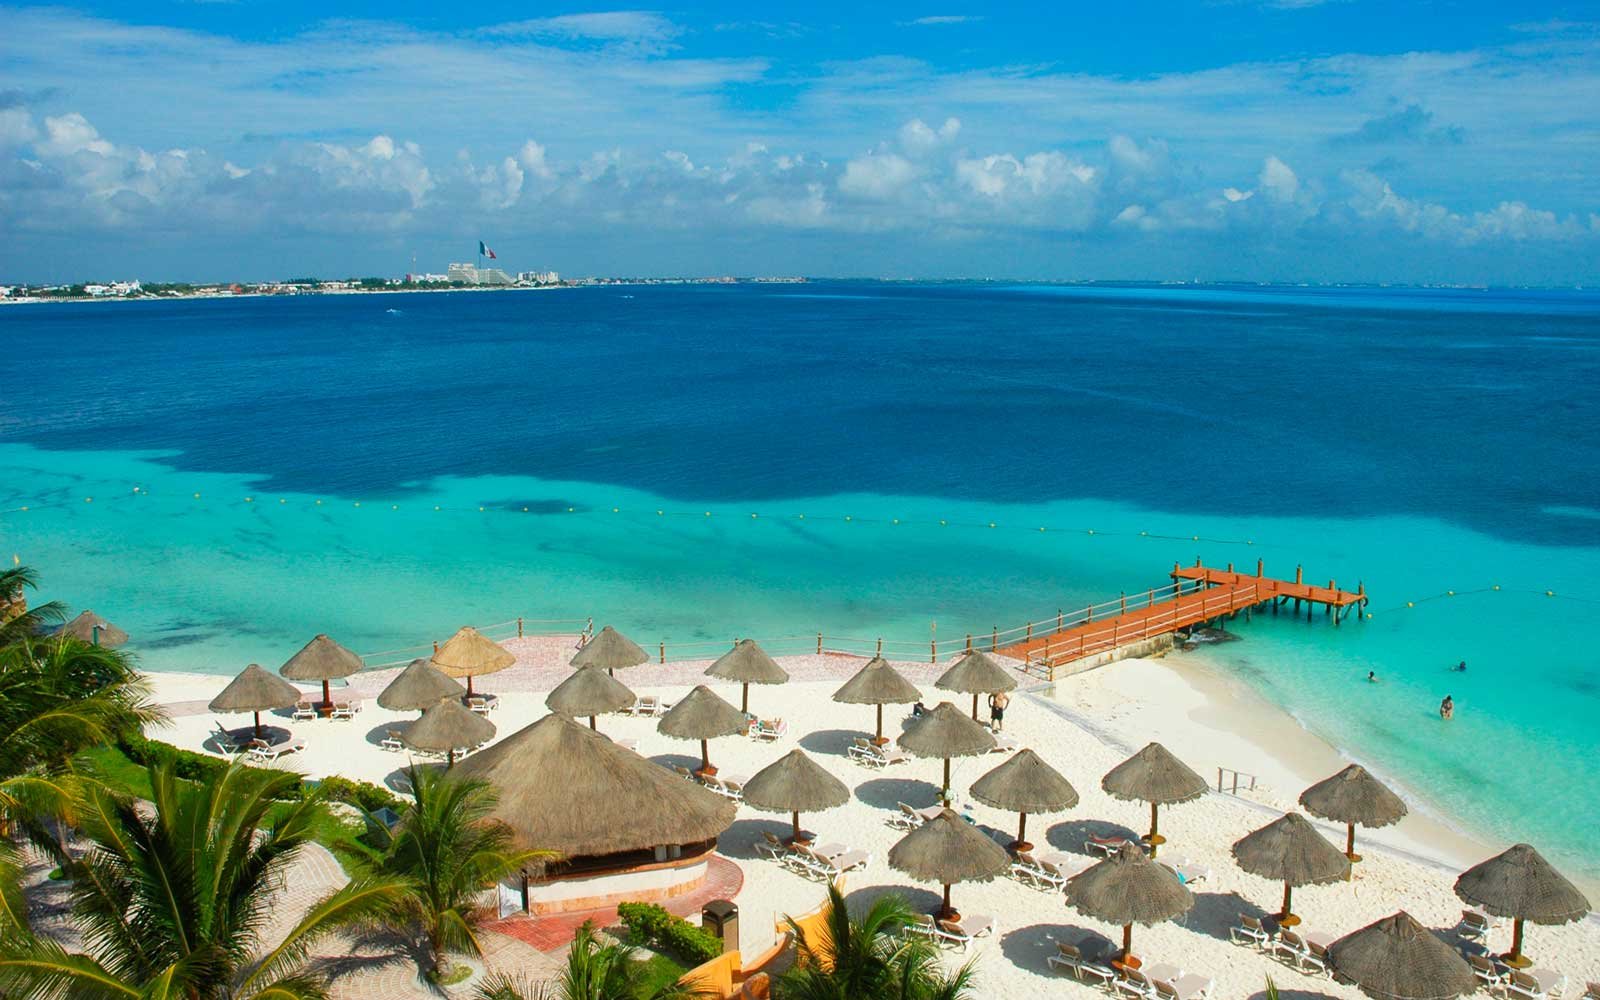 Houston to Cancun Mexico $190 RT Nonstop Airfares on United Airlines BE (Travel October - February 2023)